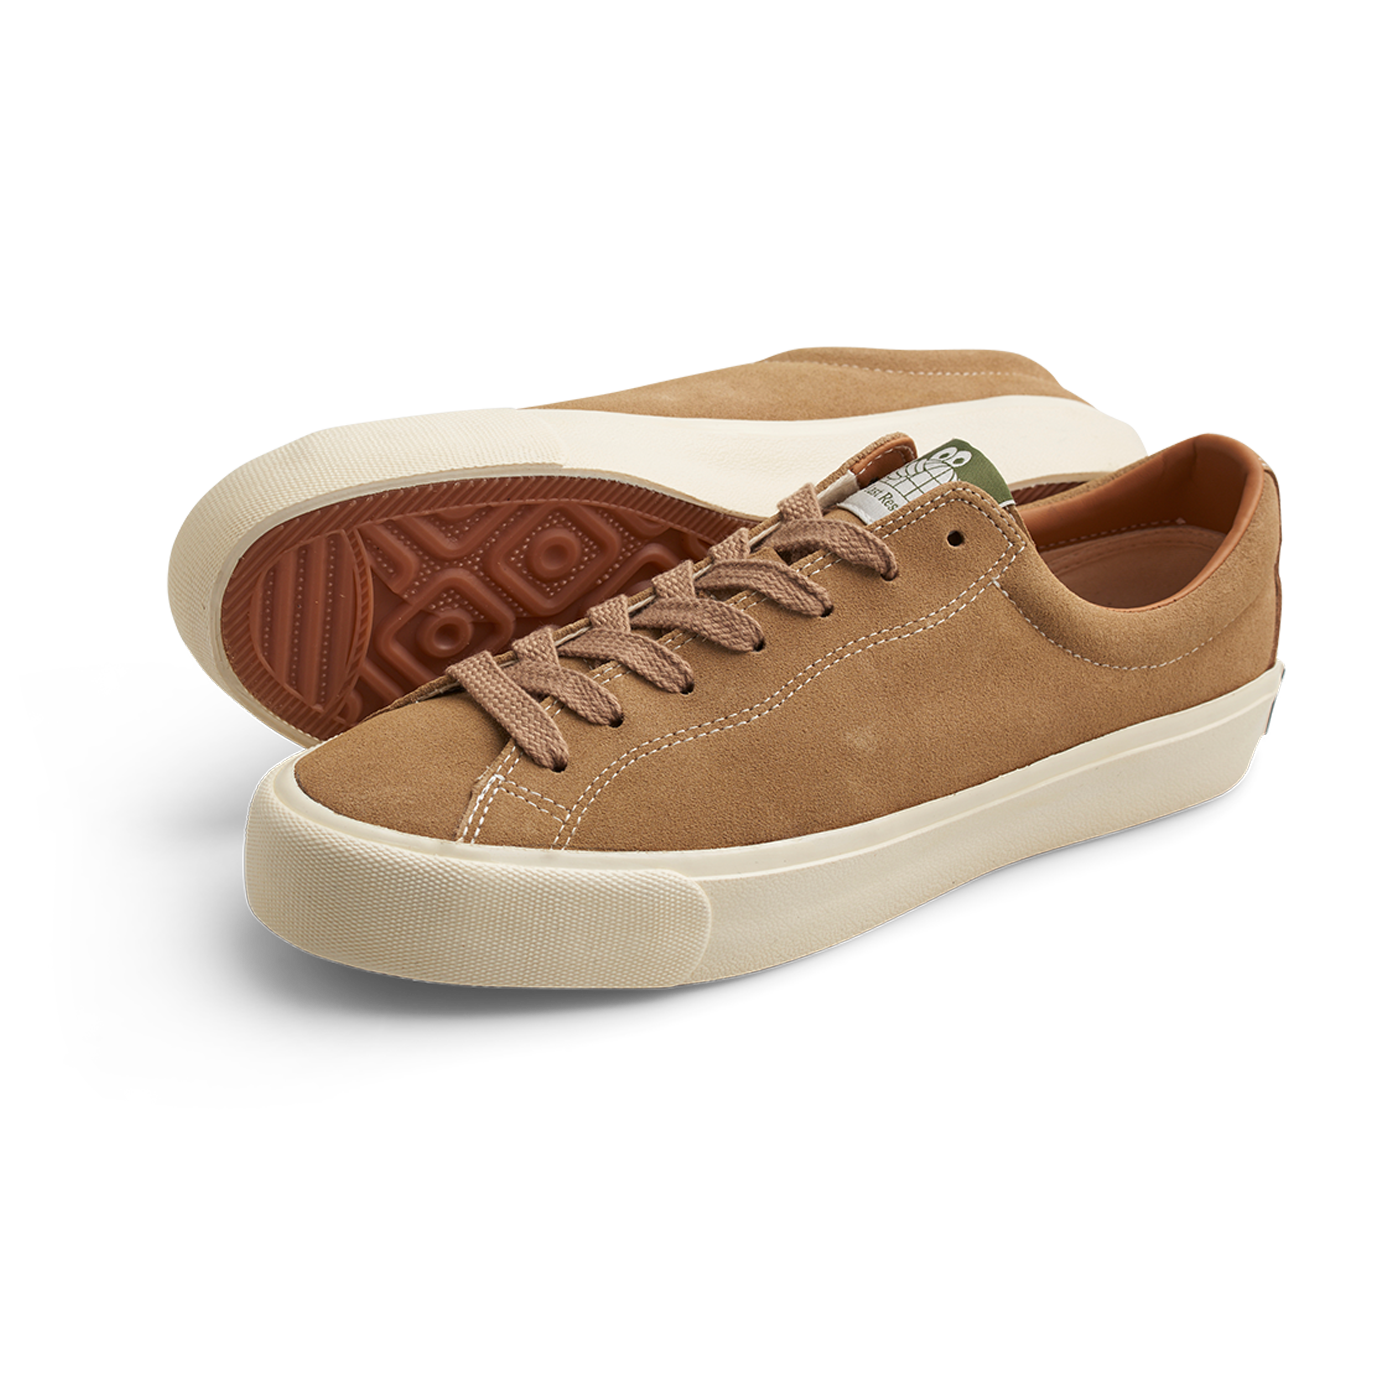 Last Resort AB VM003 Suede LO Shoes - Sand/White